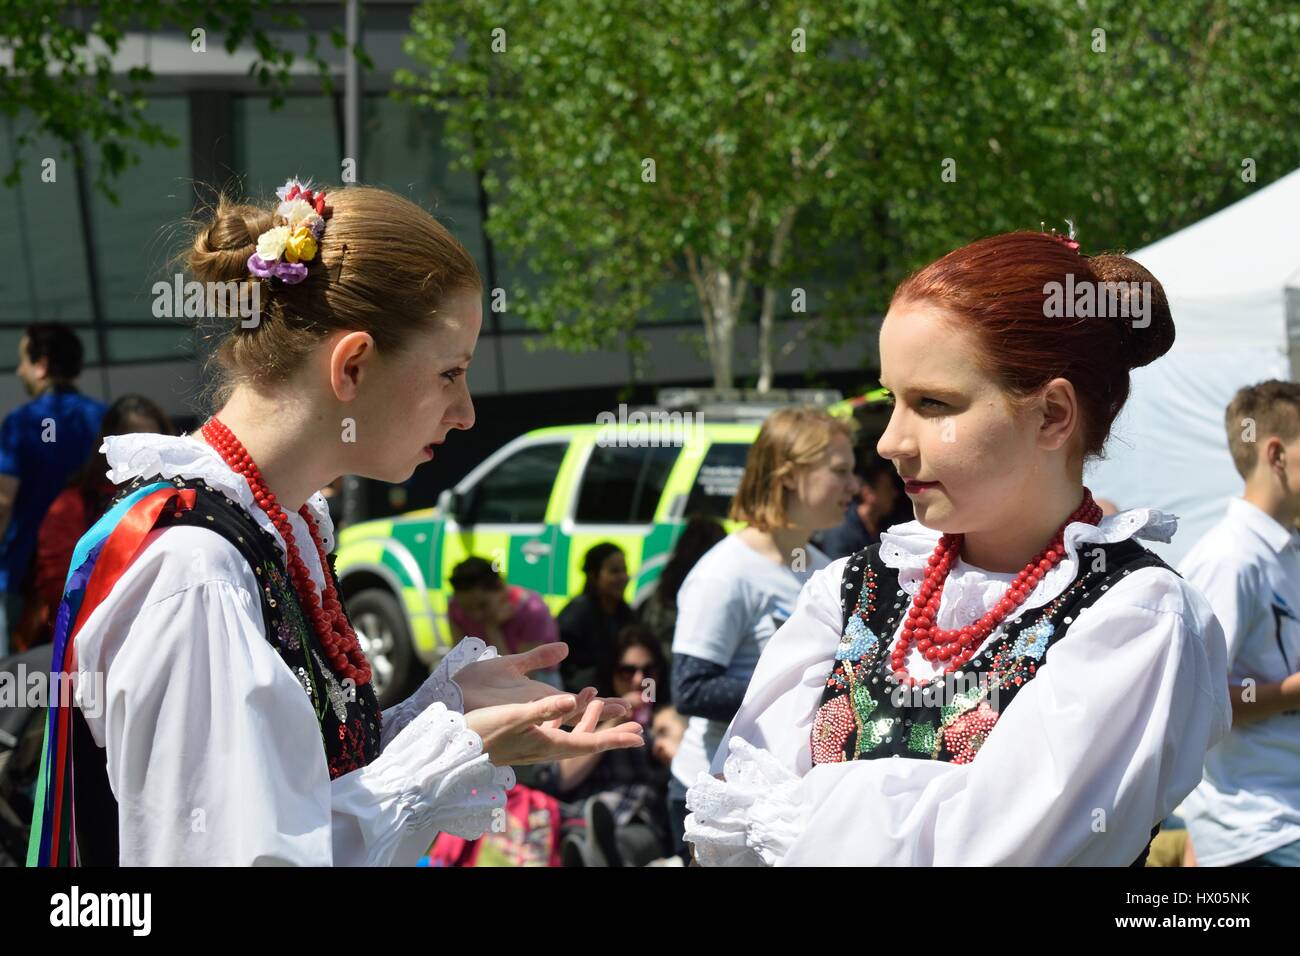 LONDON  ENGLAND 9 May 2015: Two girls in traditional polish costume chatting Stock Photo